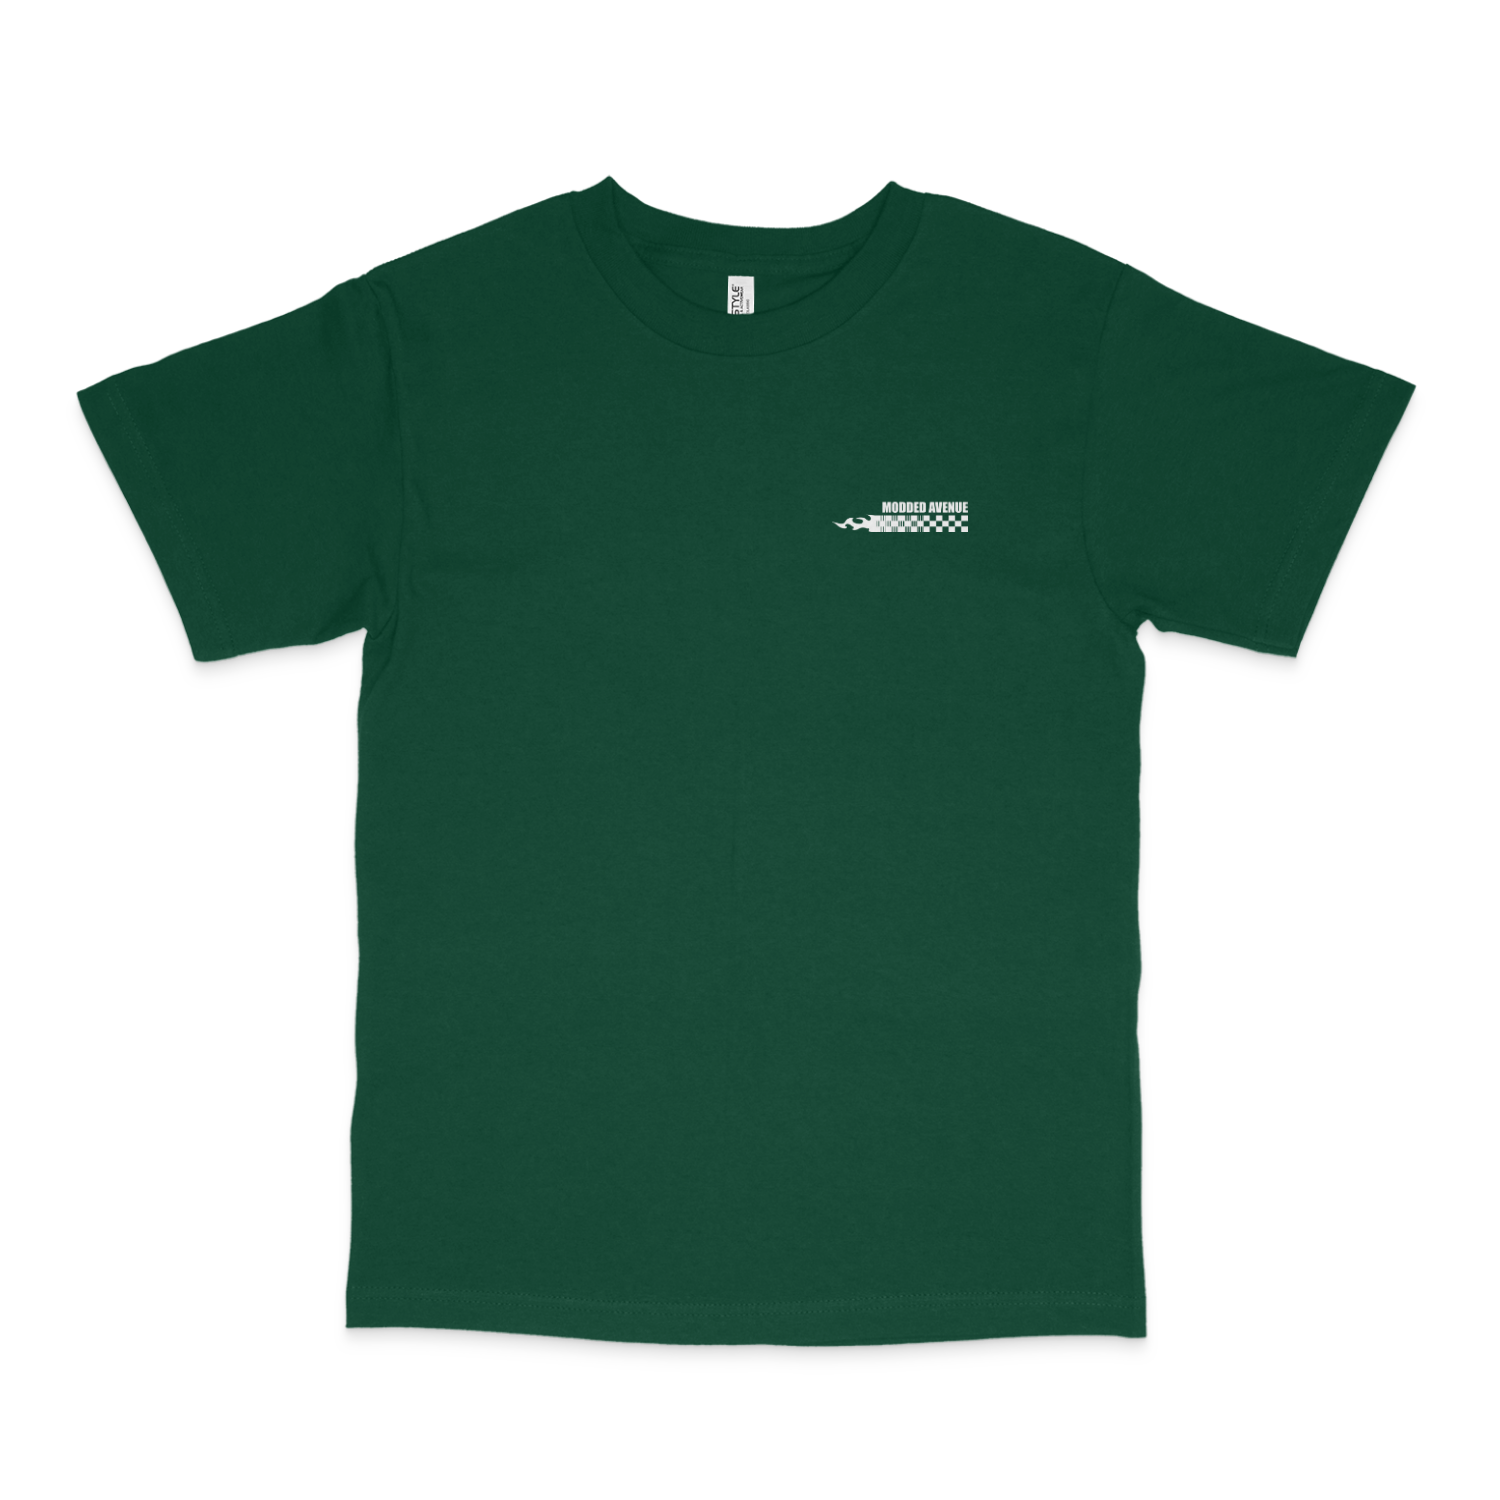 Daydreamin Forest Green Tee